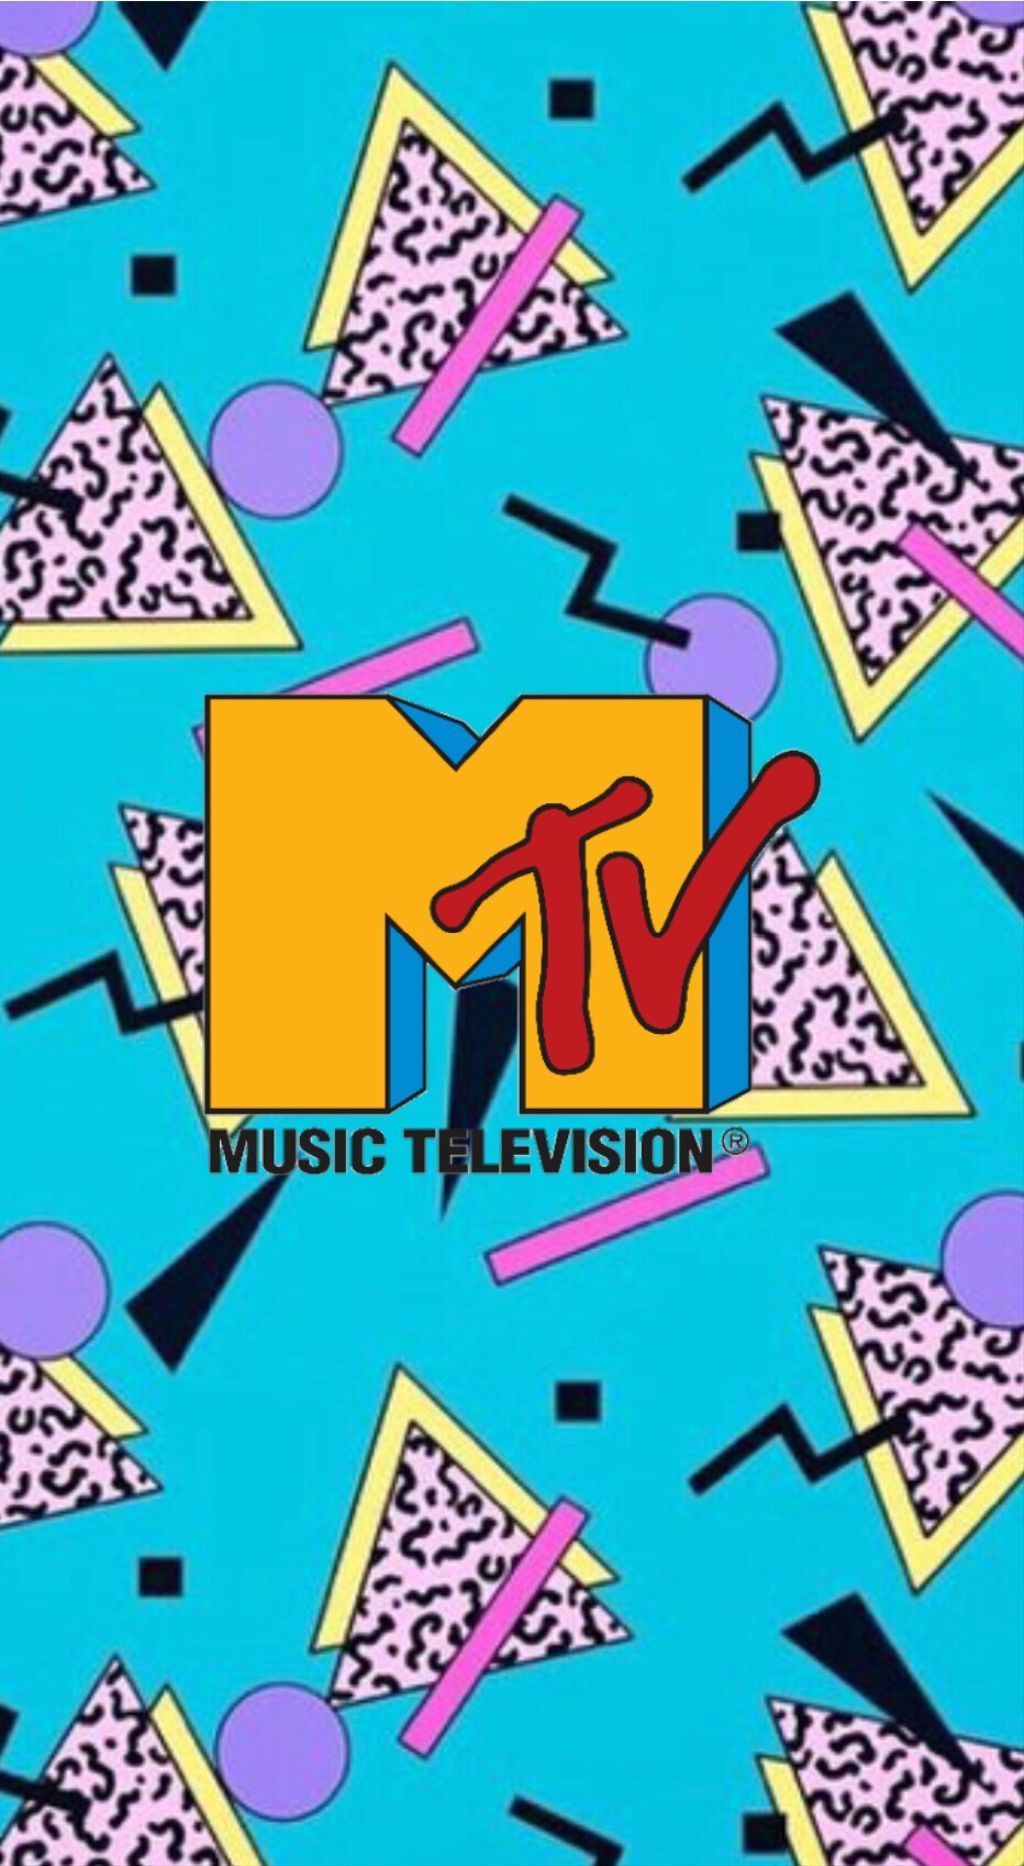 The mtv logo in a colorful pattern - 90s, 80s